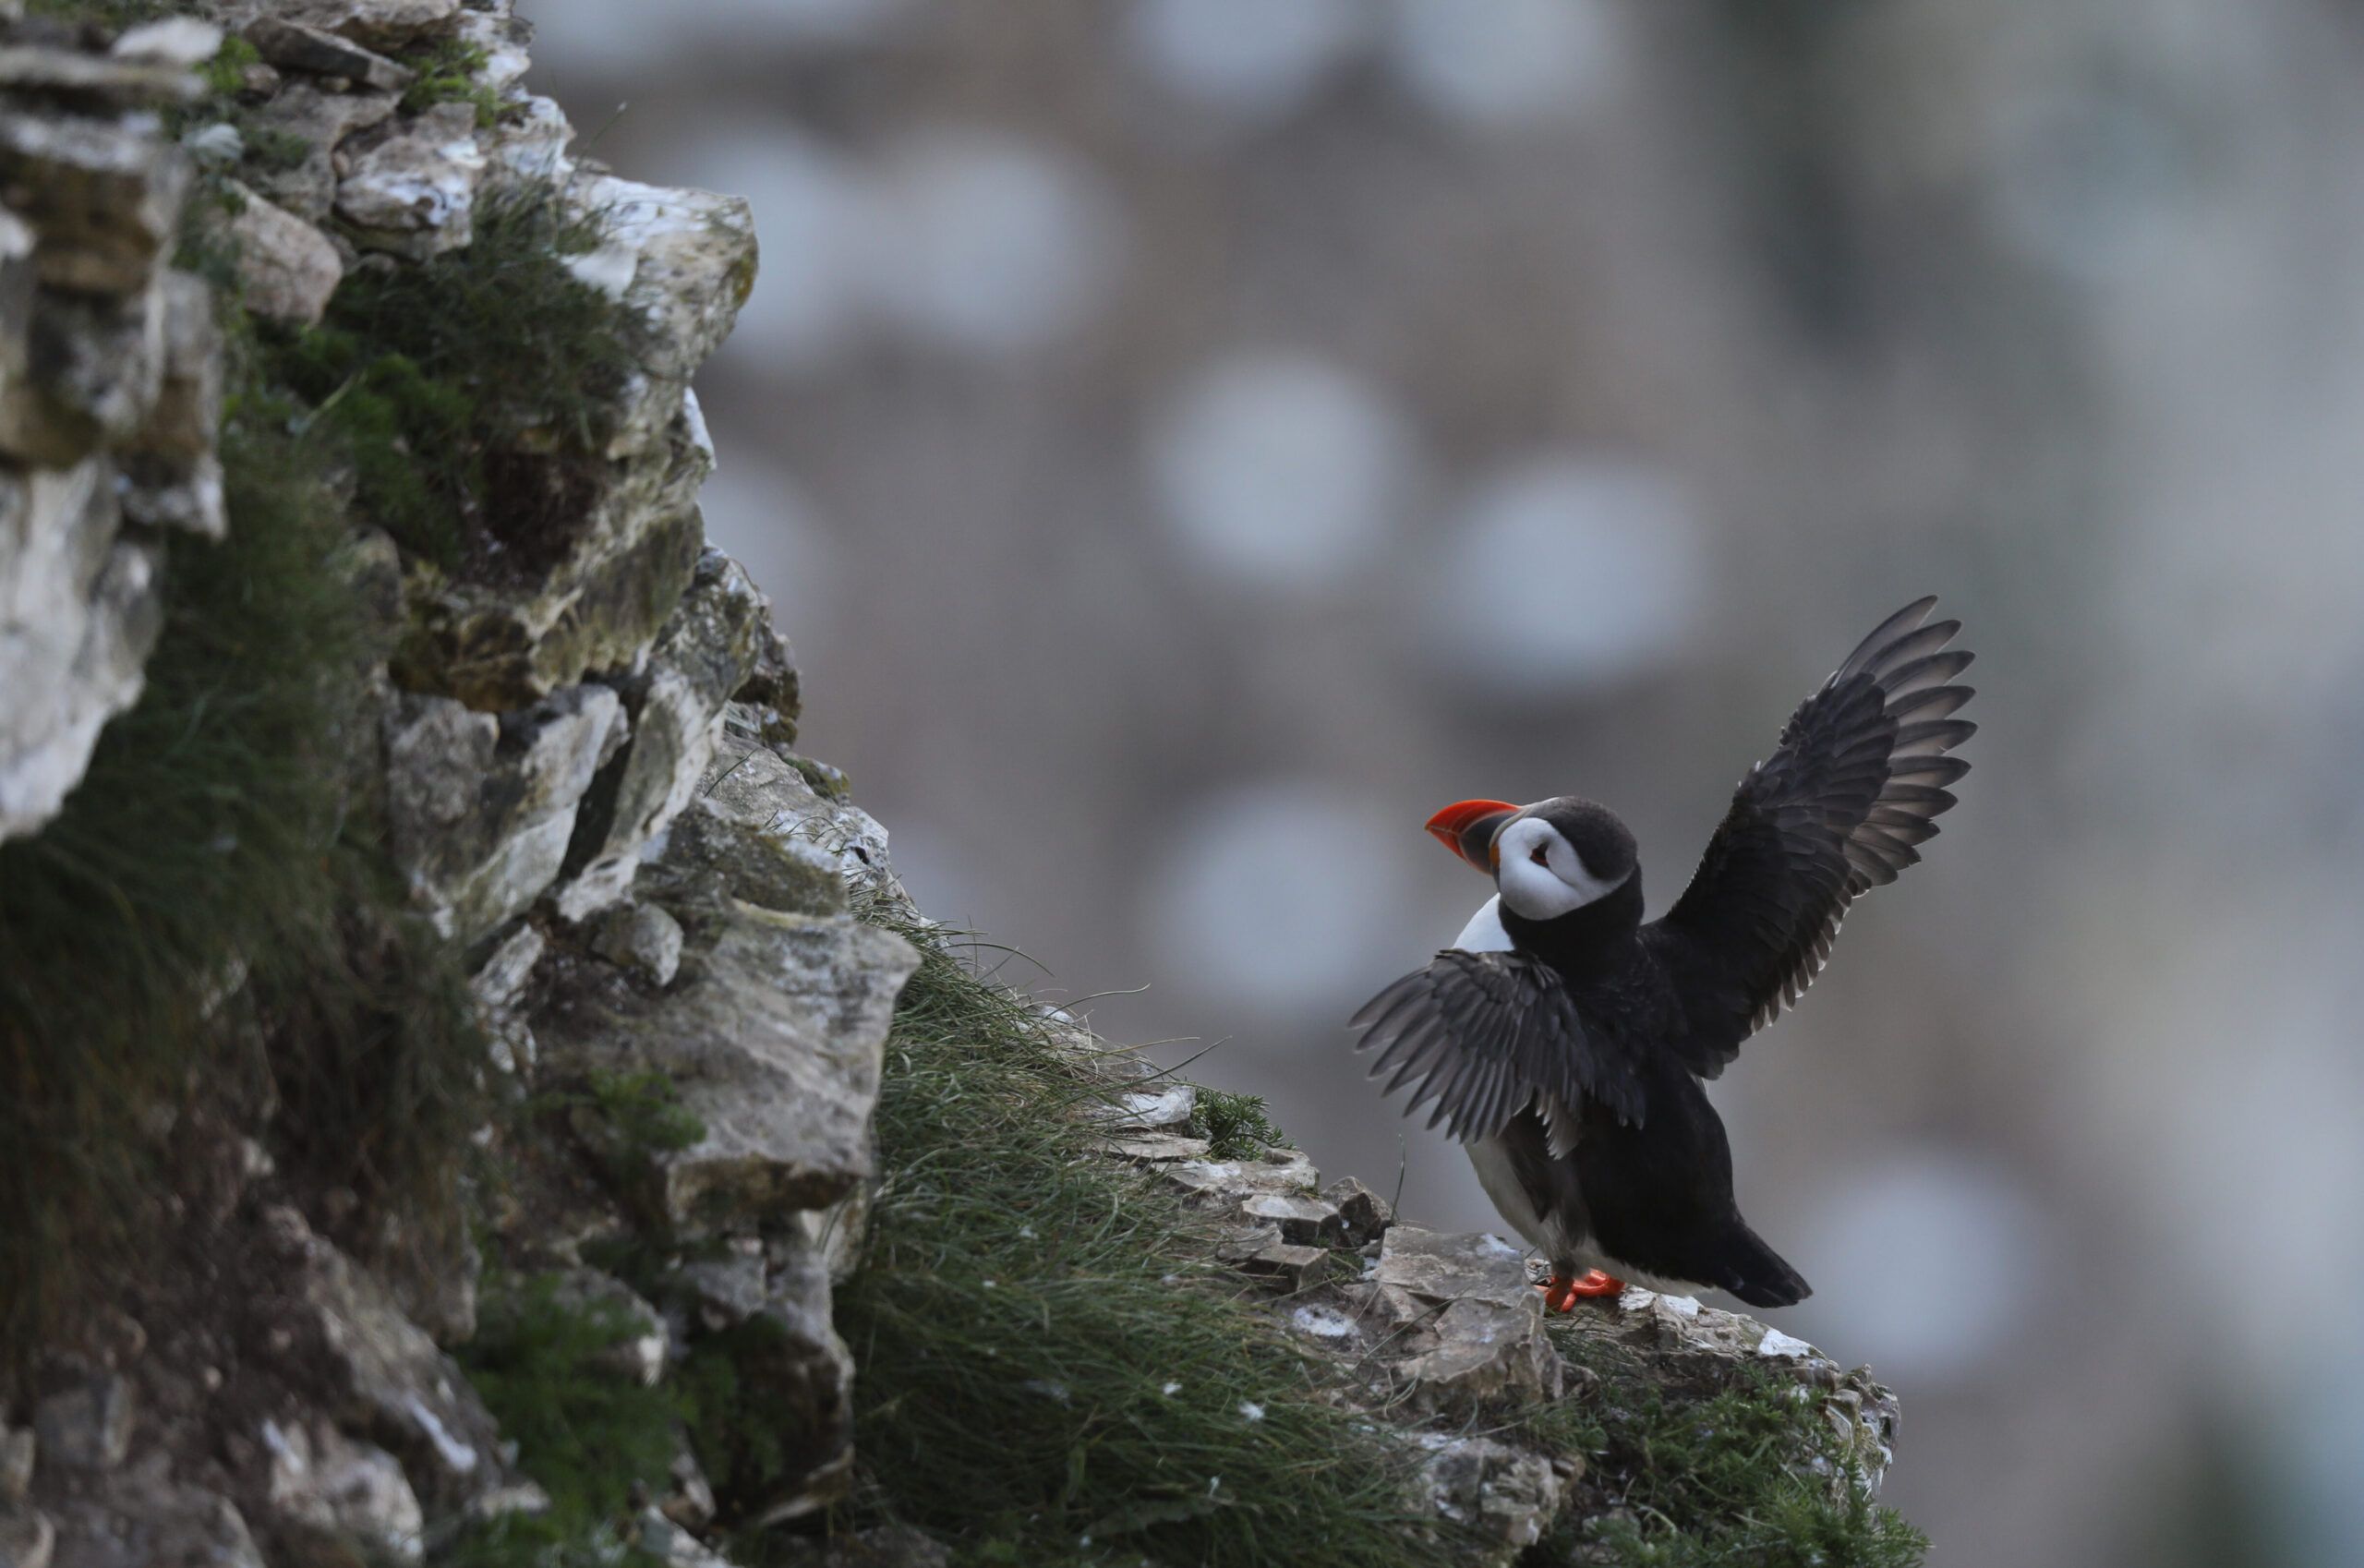 Puffin-scaled-aspect-ratio-540-358